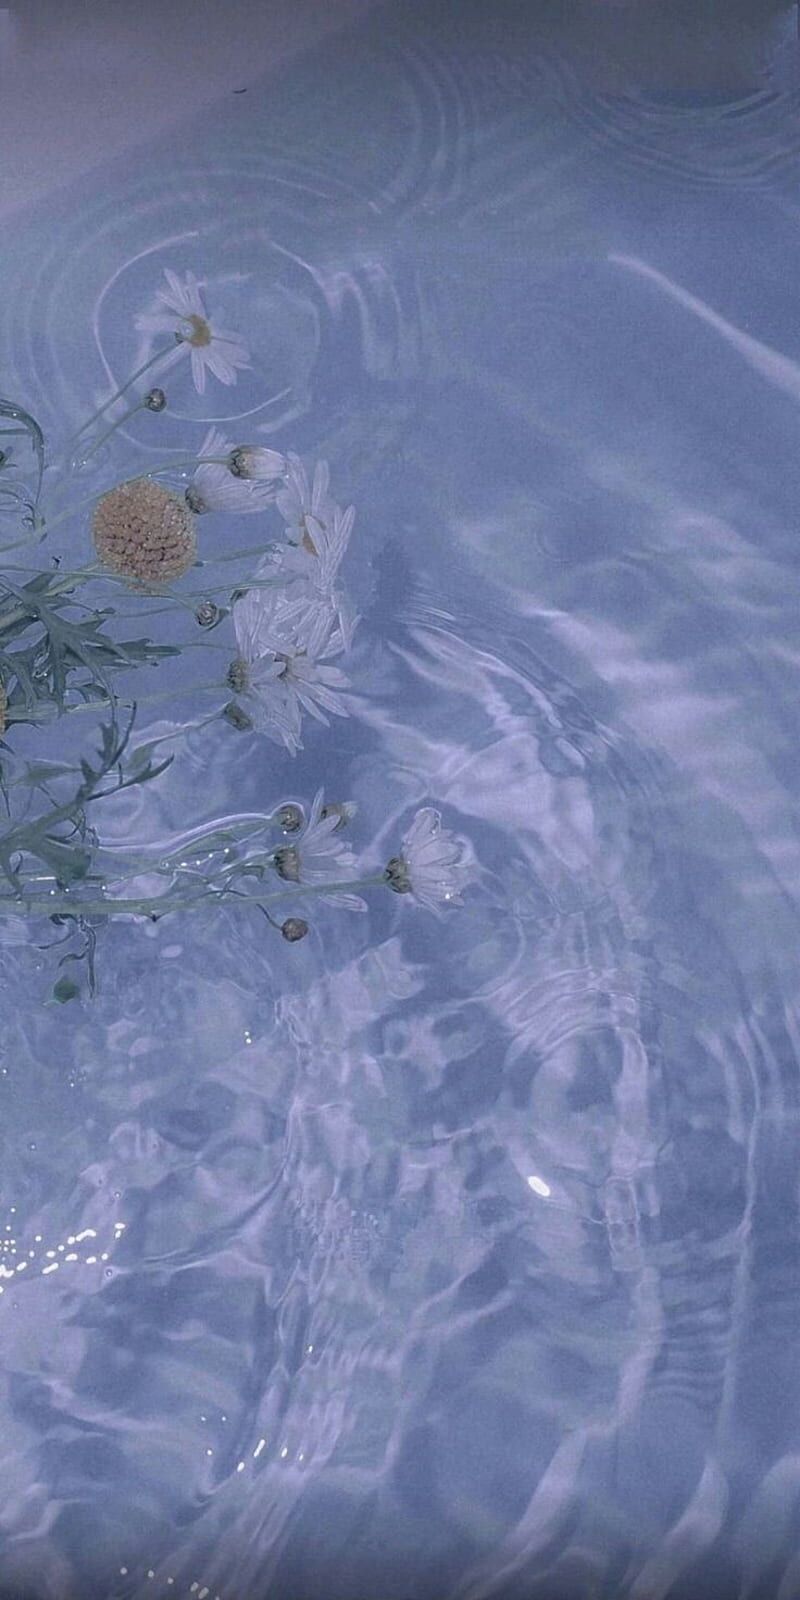 A bunch of flowers in the water - Water